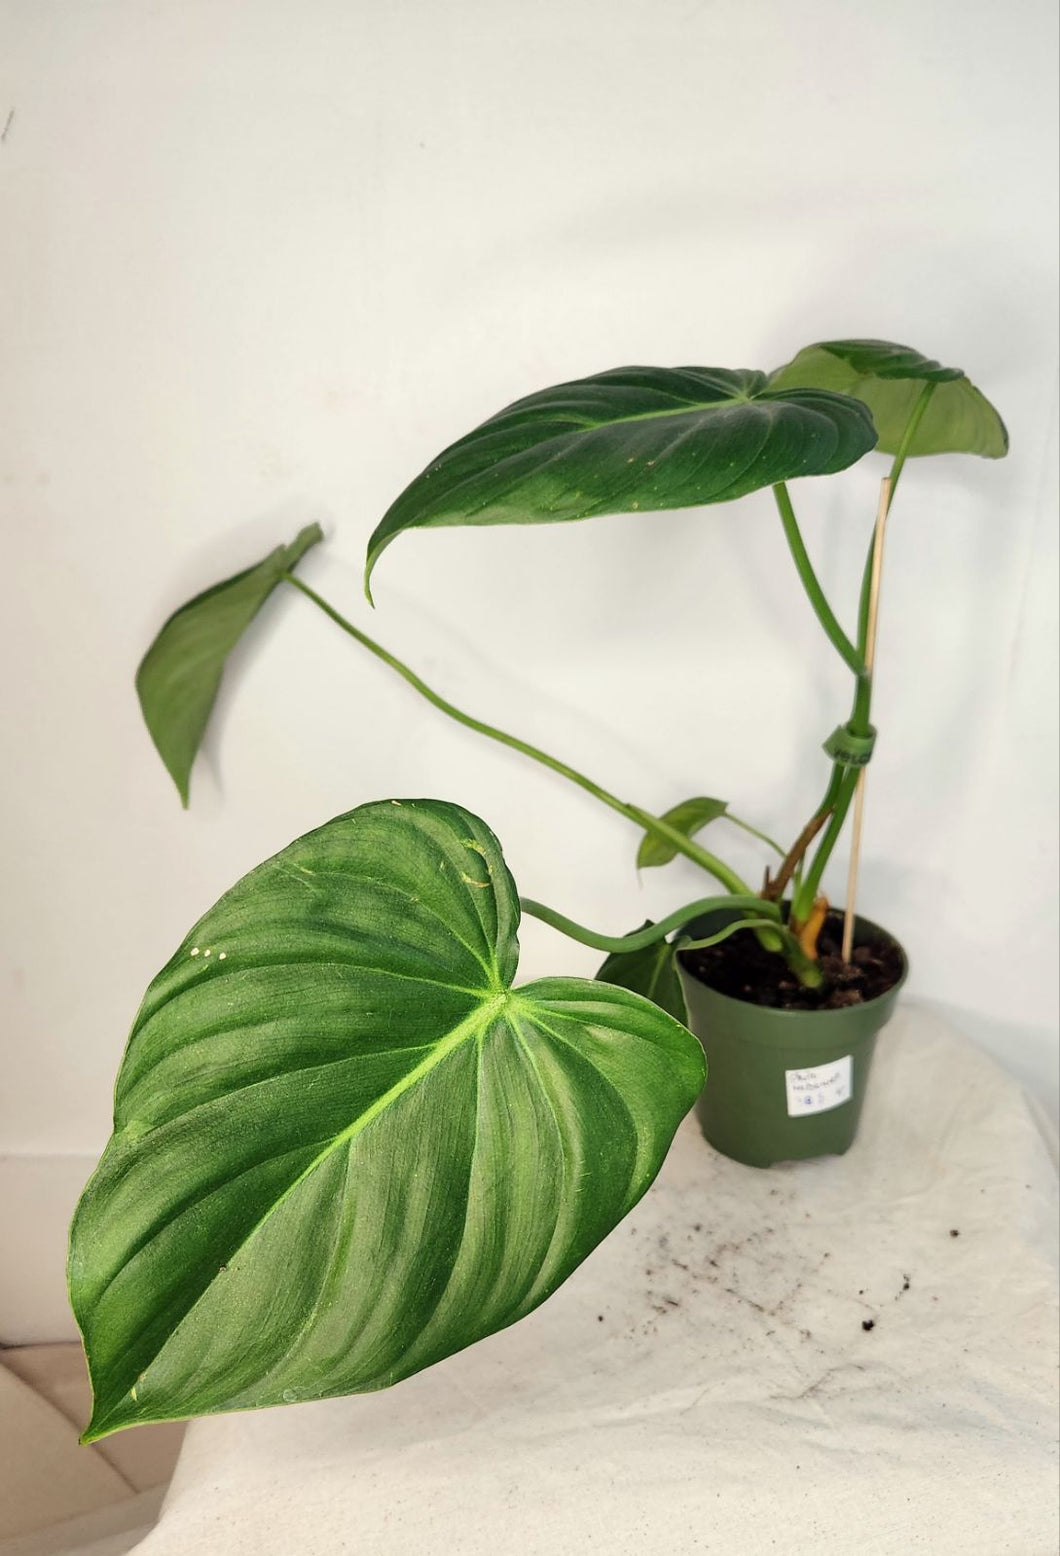 Philodendron Mcdowell